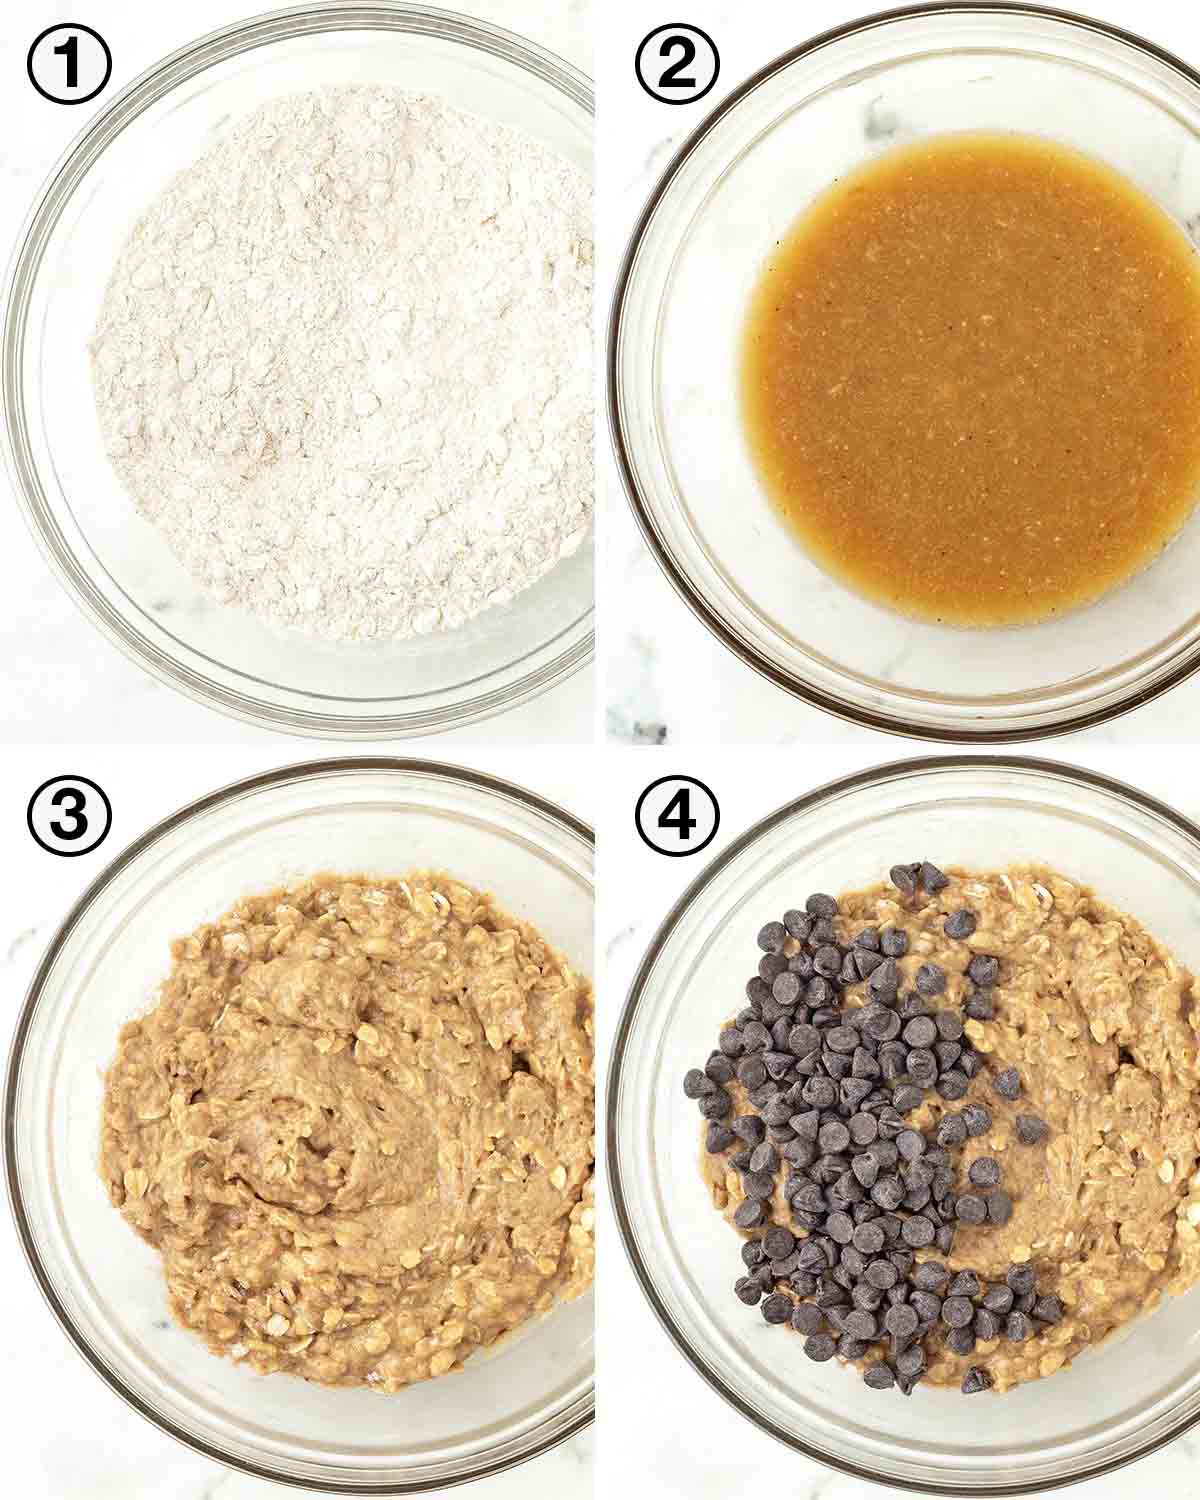 A collage of four images showing the first sequence of steps needed to make vegan banana oat muffins.